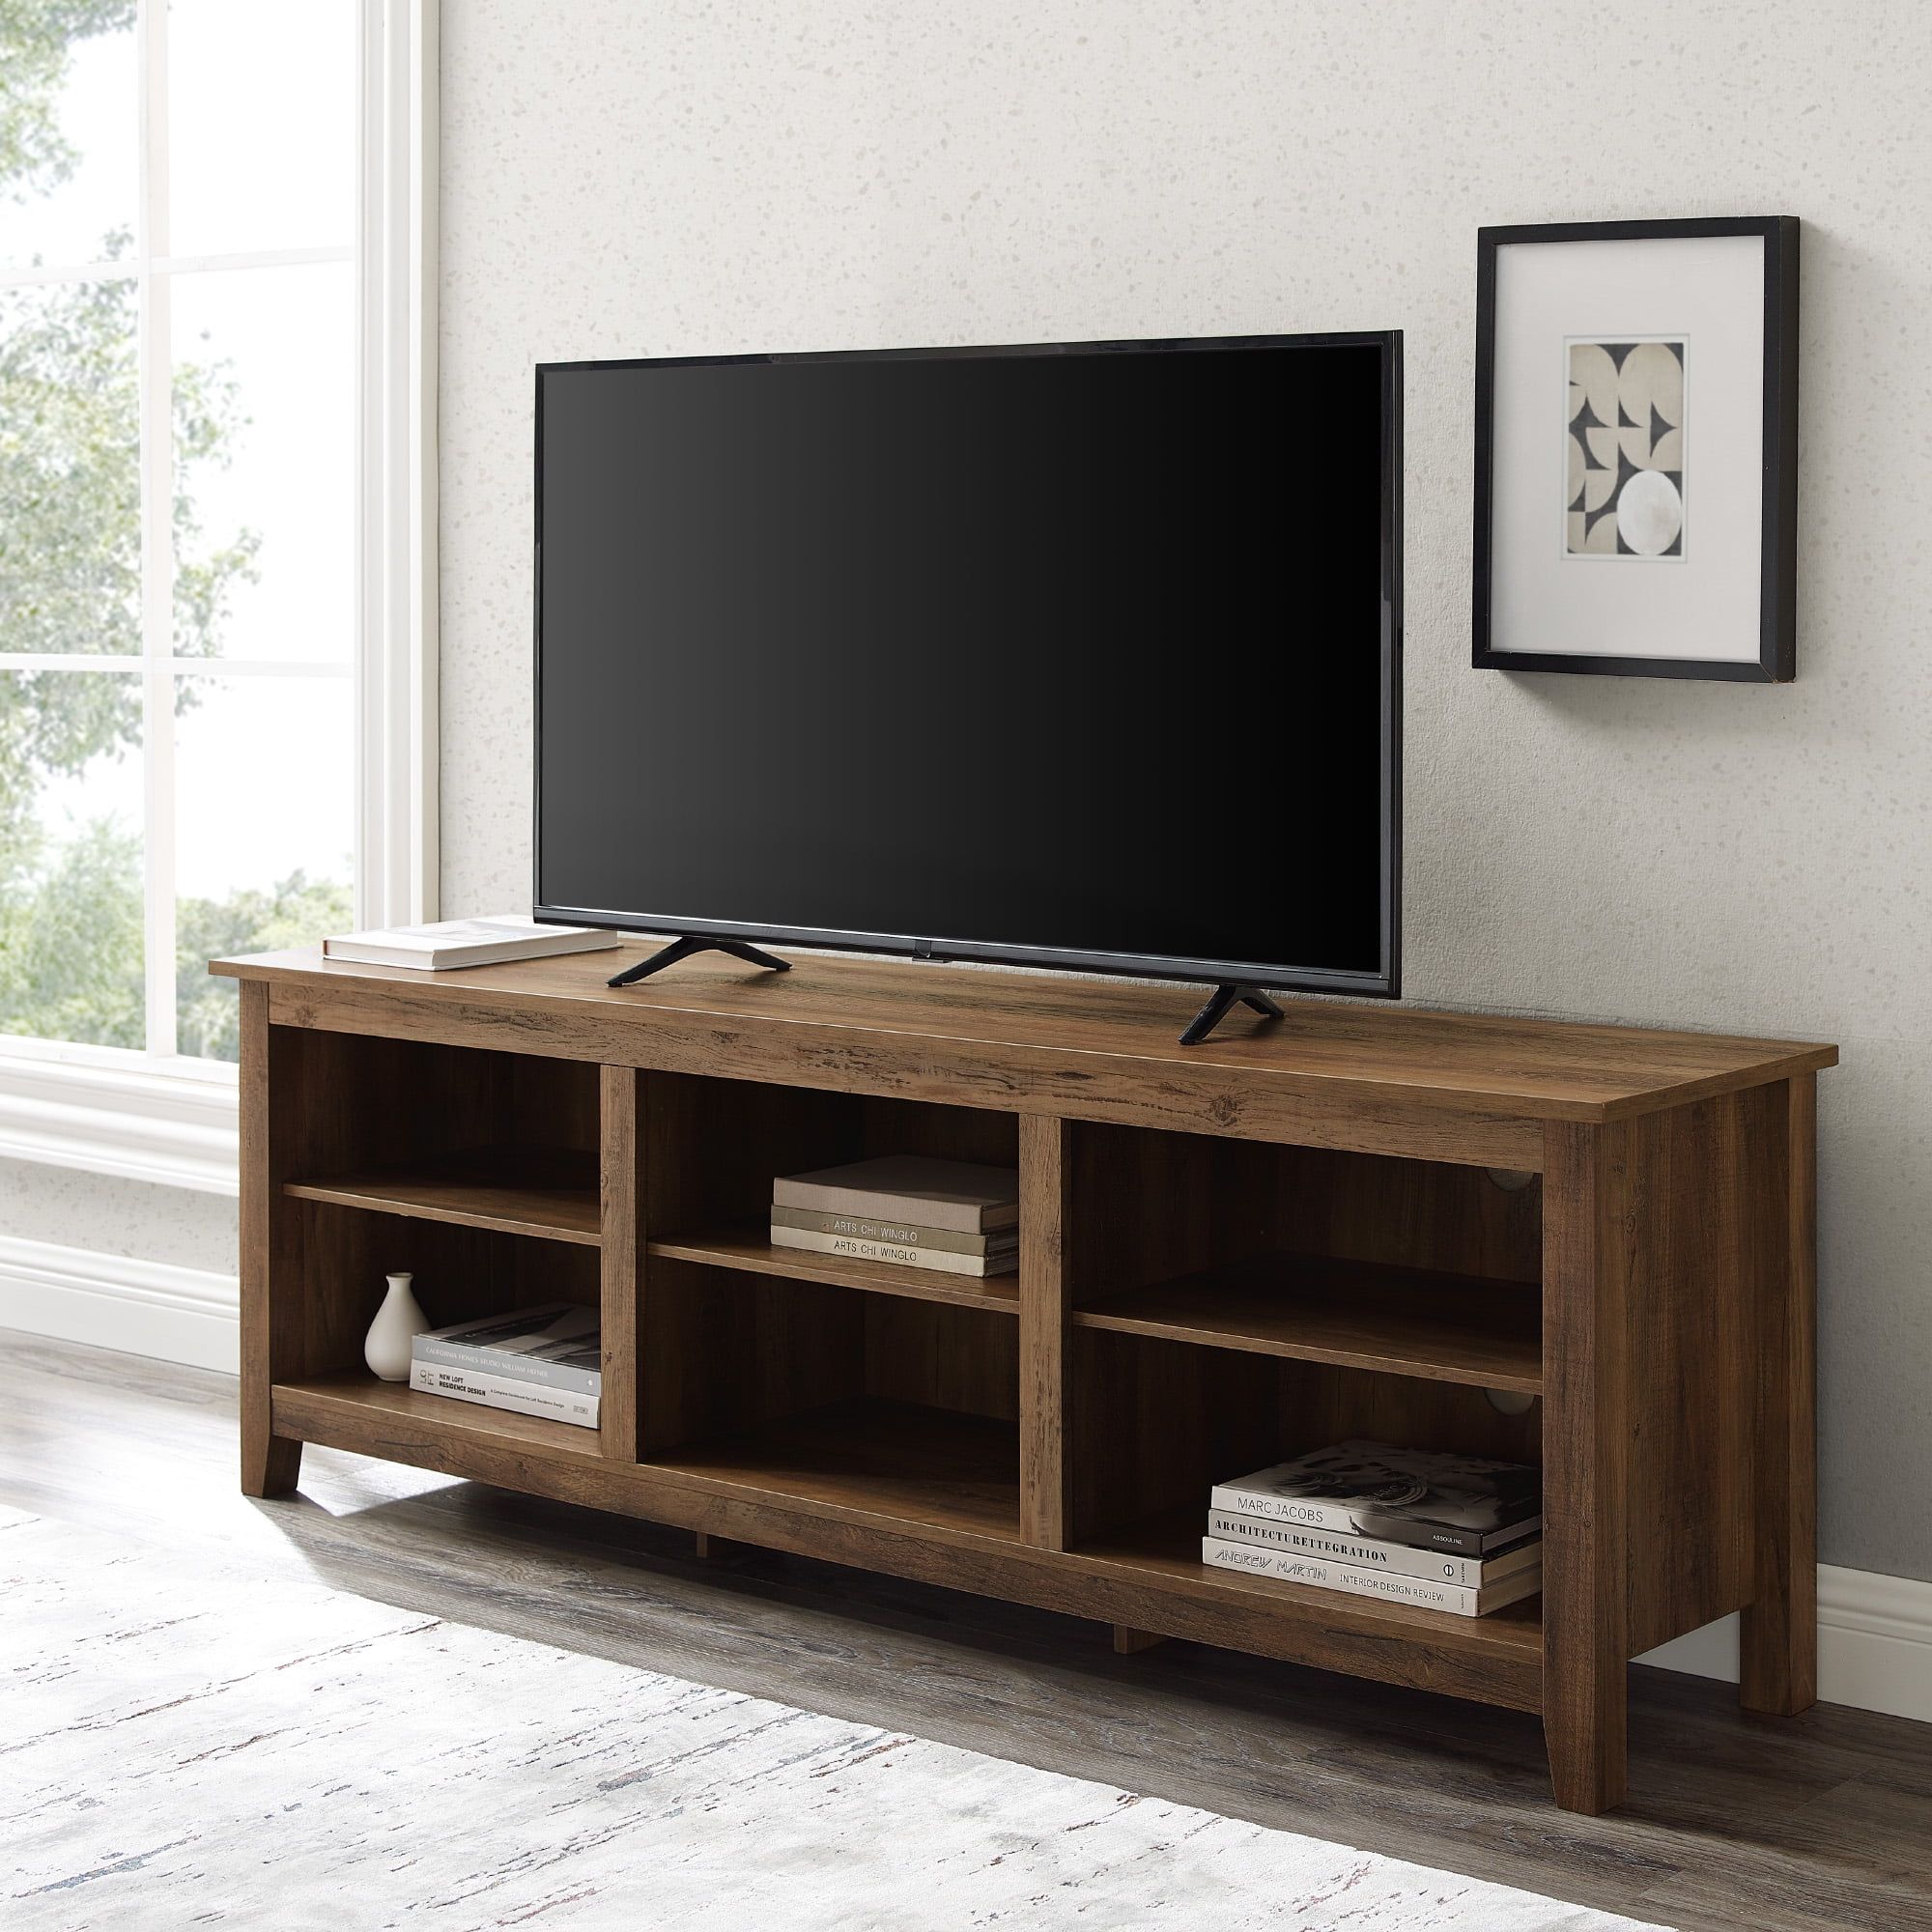 Woven Paths Open Storage Tv Stand For Tvs Up To 80", Reclaimed Barnwood Regarding Cafe Tv Stands With Storage (View 7 of 20)